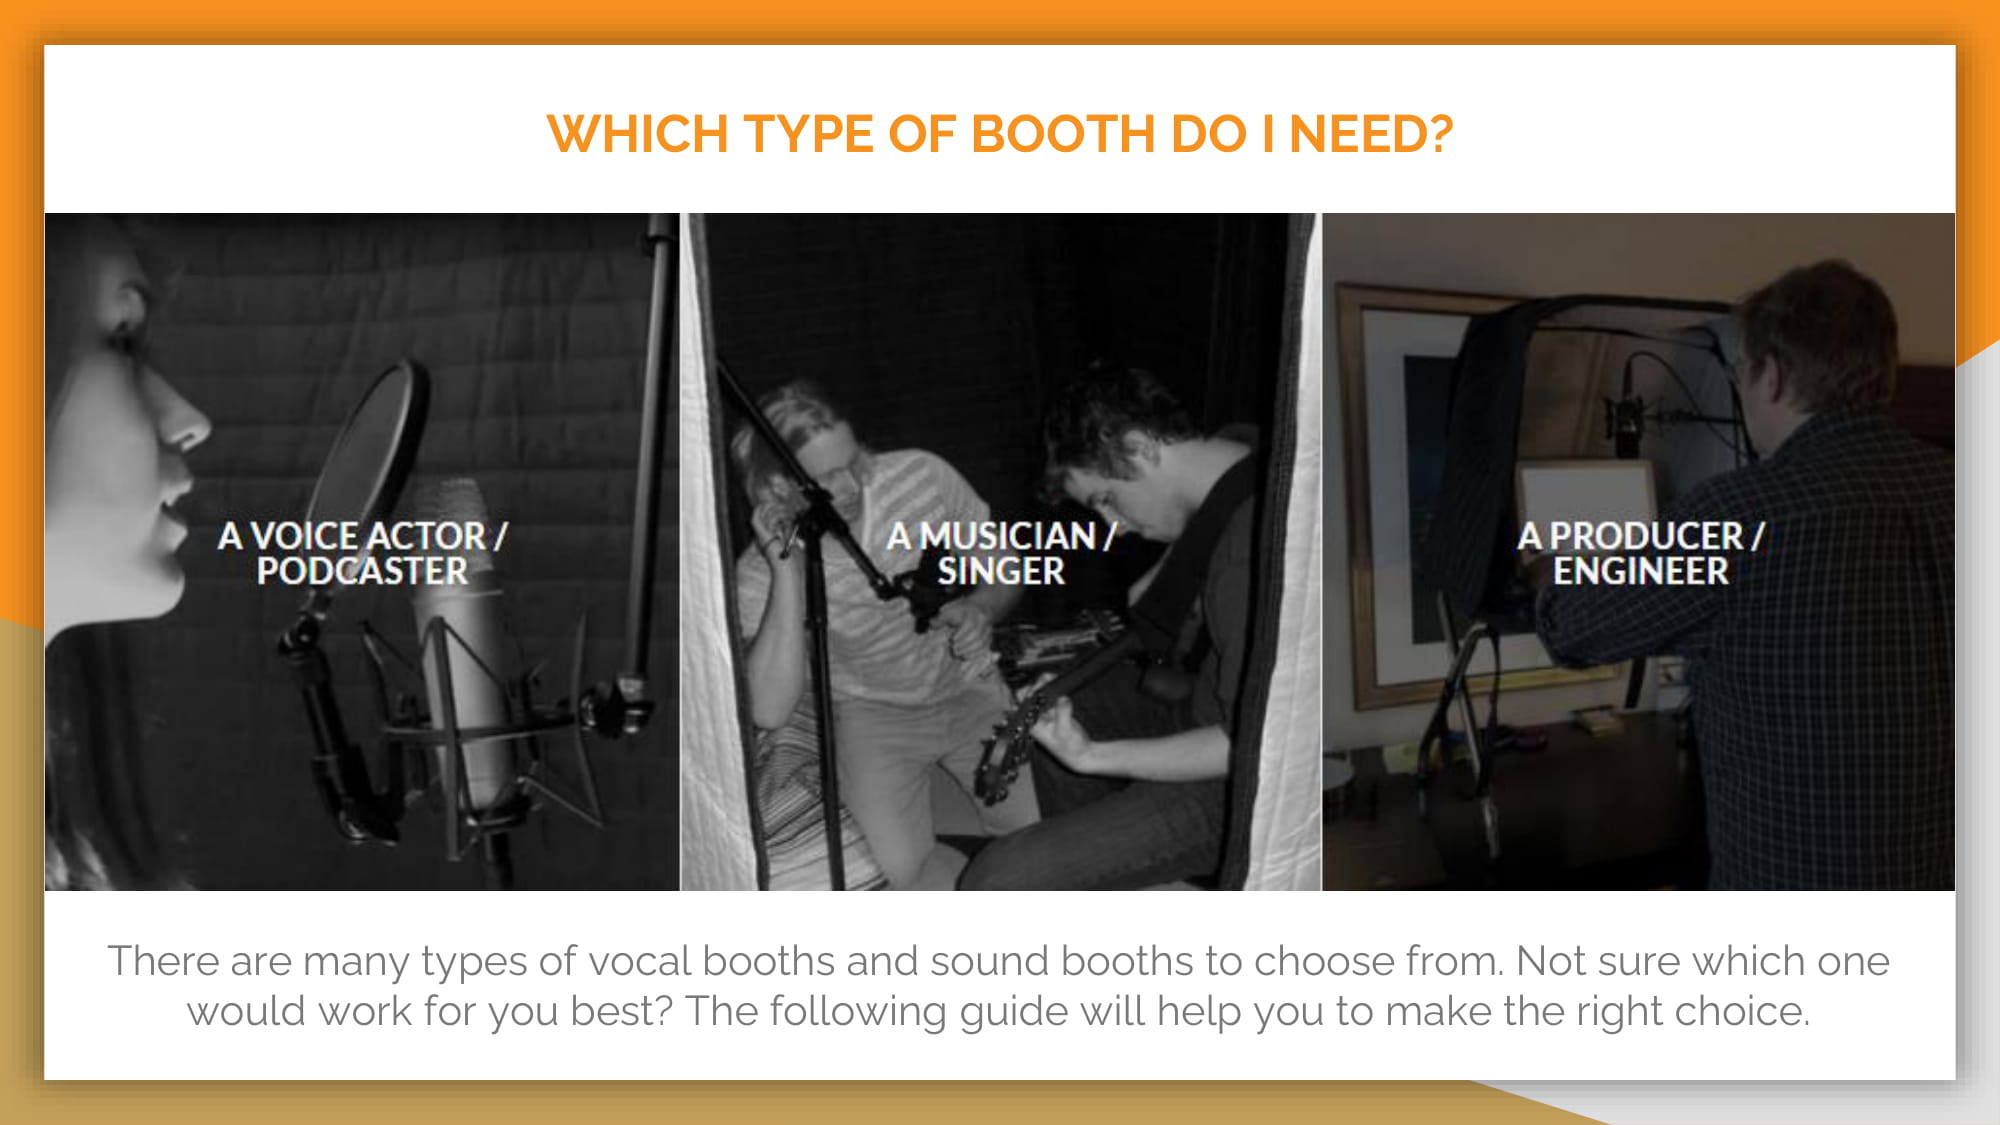 WHICH TYPE OF BOOTH DO I NEED